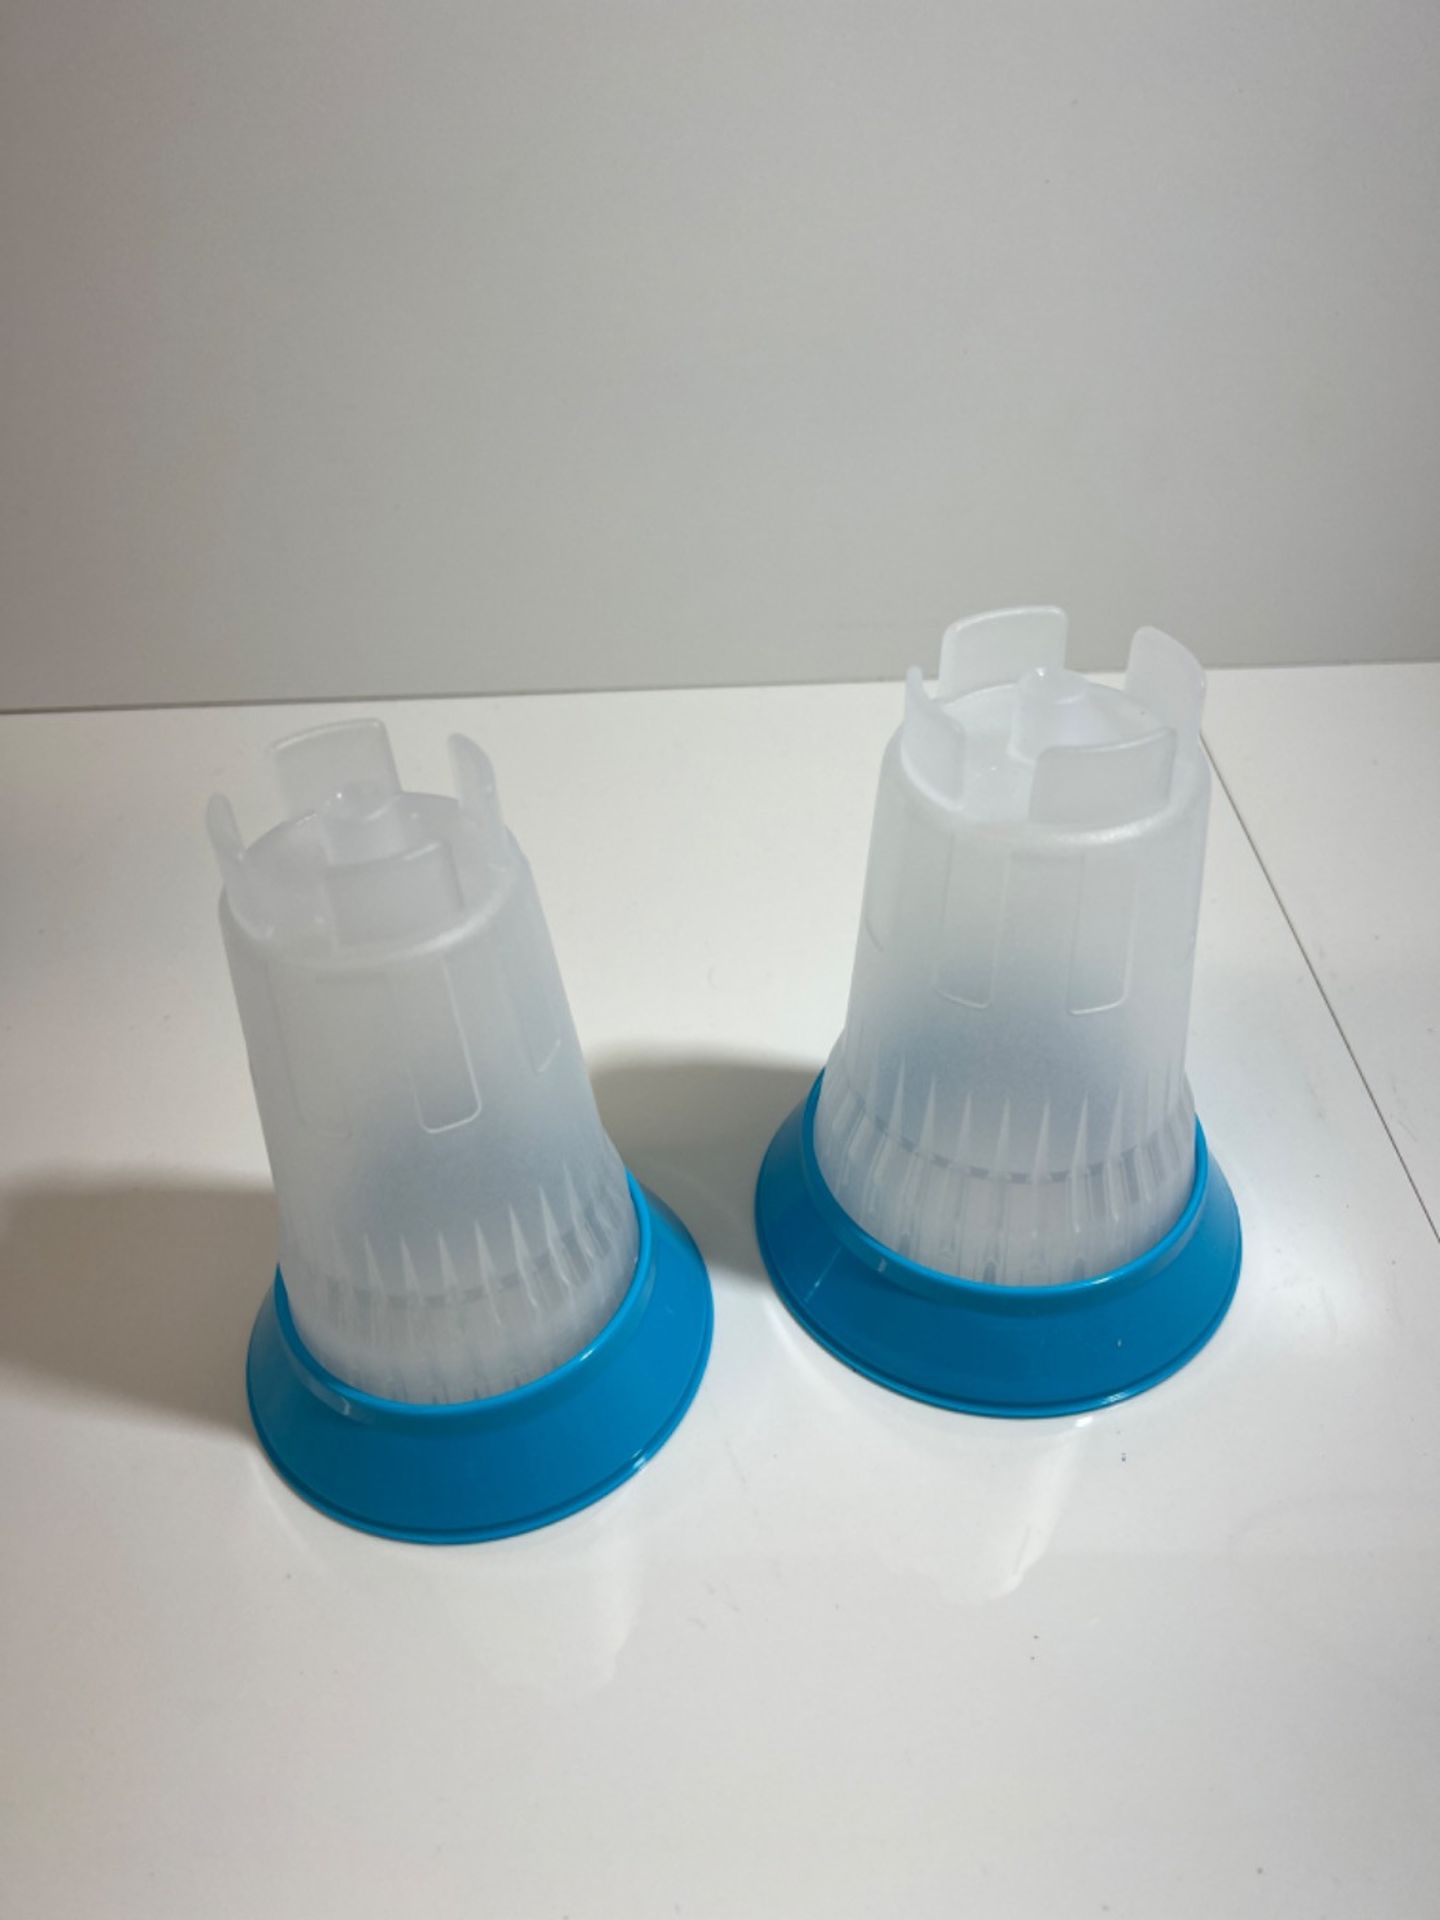 Laser 8571 Oil Filter Removal Cup Set 2pc - Image 3 of 3